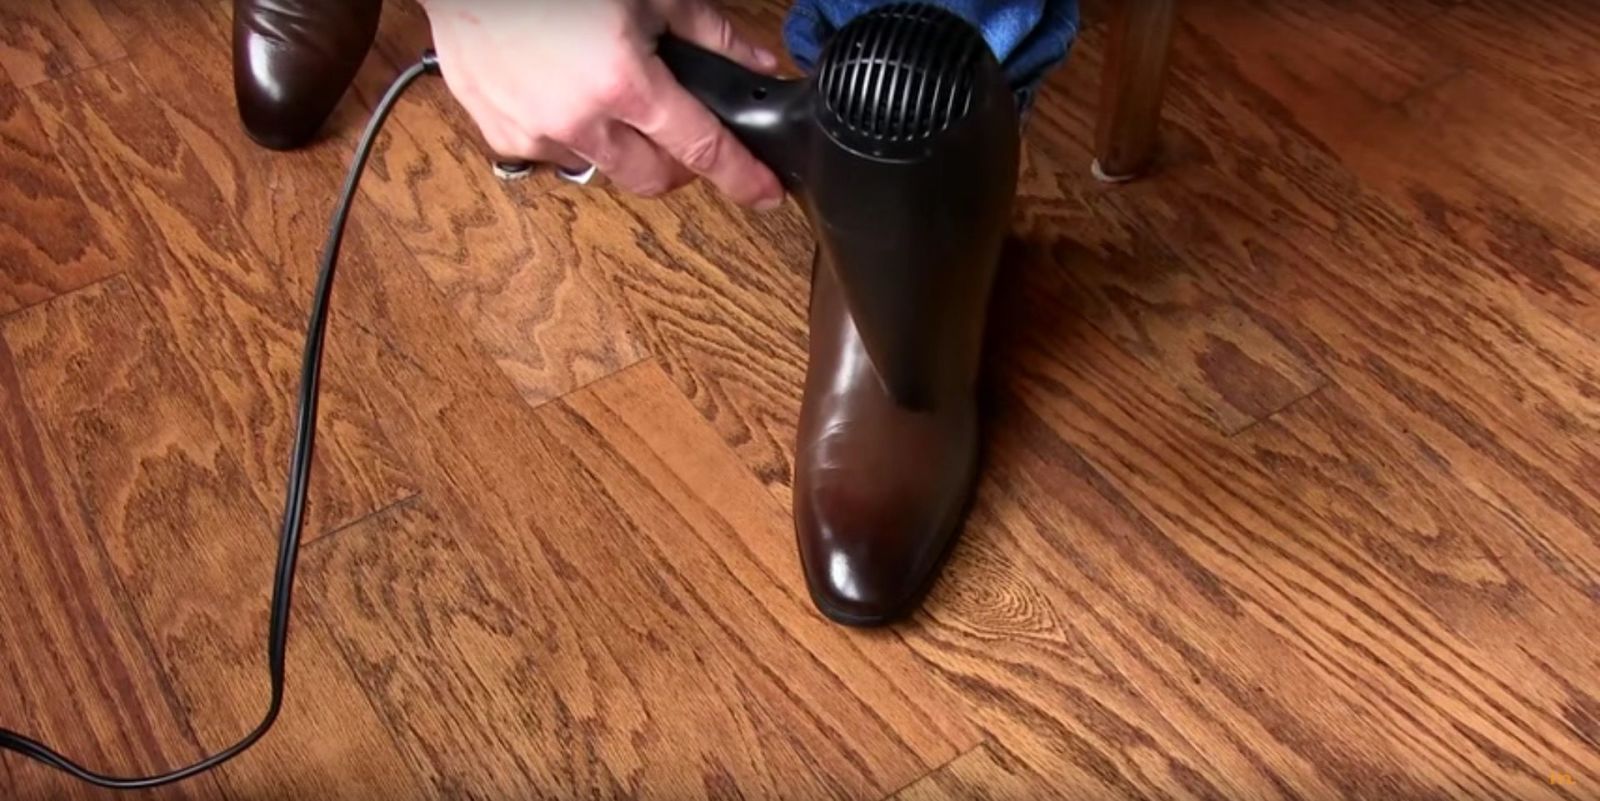 hair dryer leather shoes